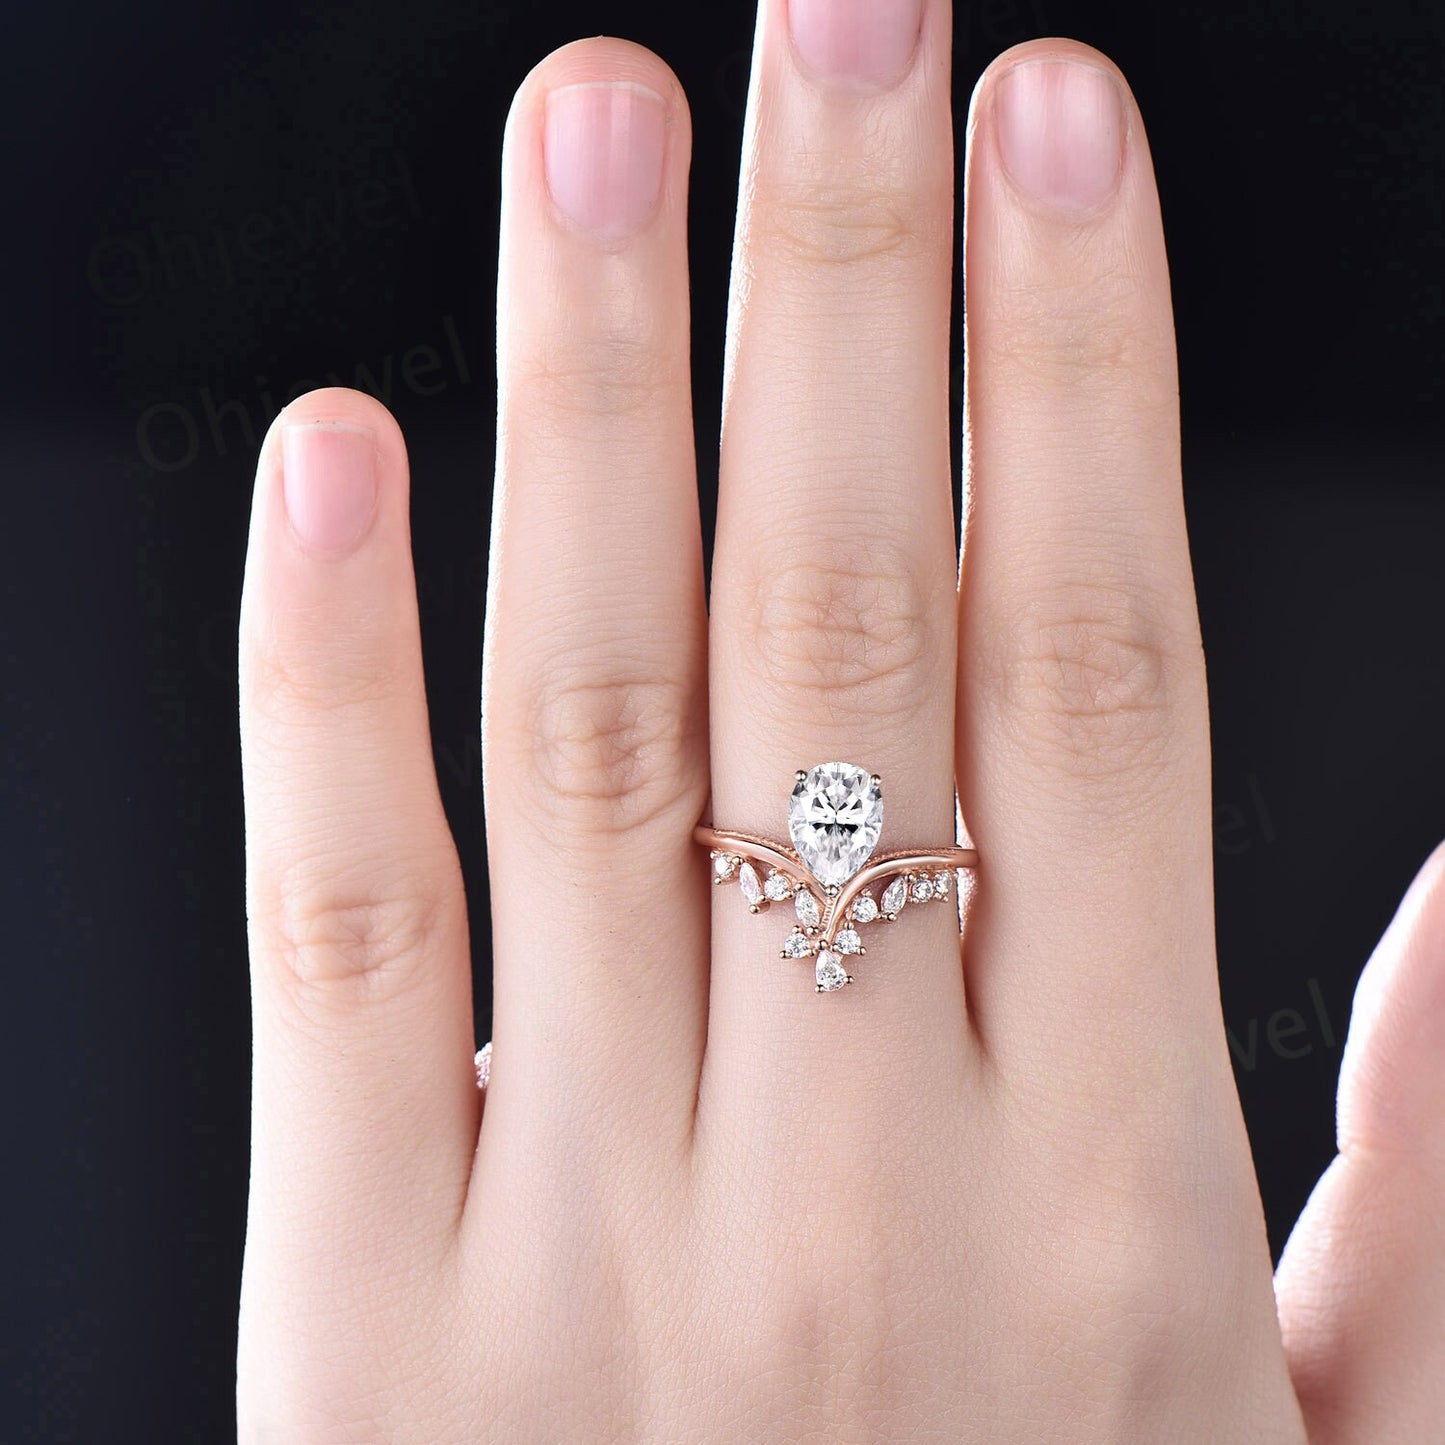 Vintage style pear shaped moissanite engagement ring solid 14k rose gold cluster marquise cut diamond ring women unique wedding promise ring